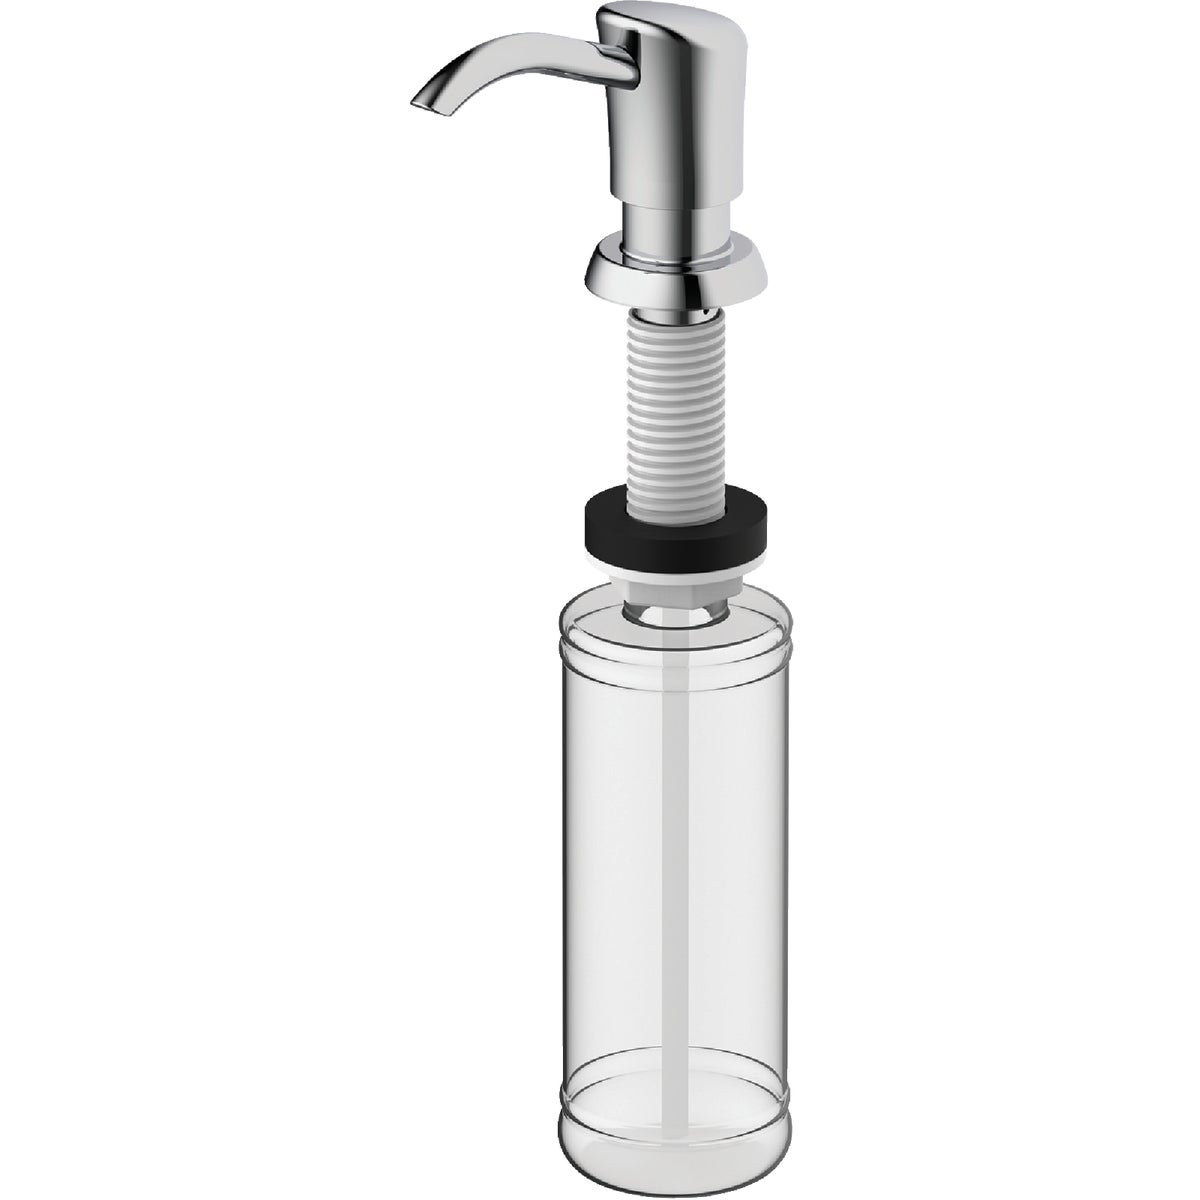 Home Impressions Soap Dispenser in Polished Chrome